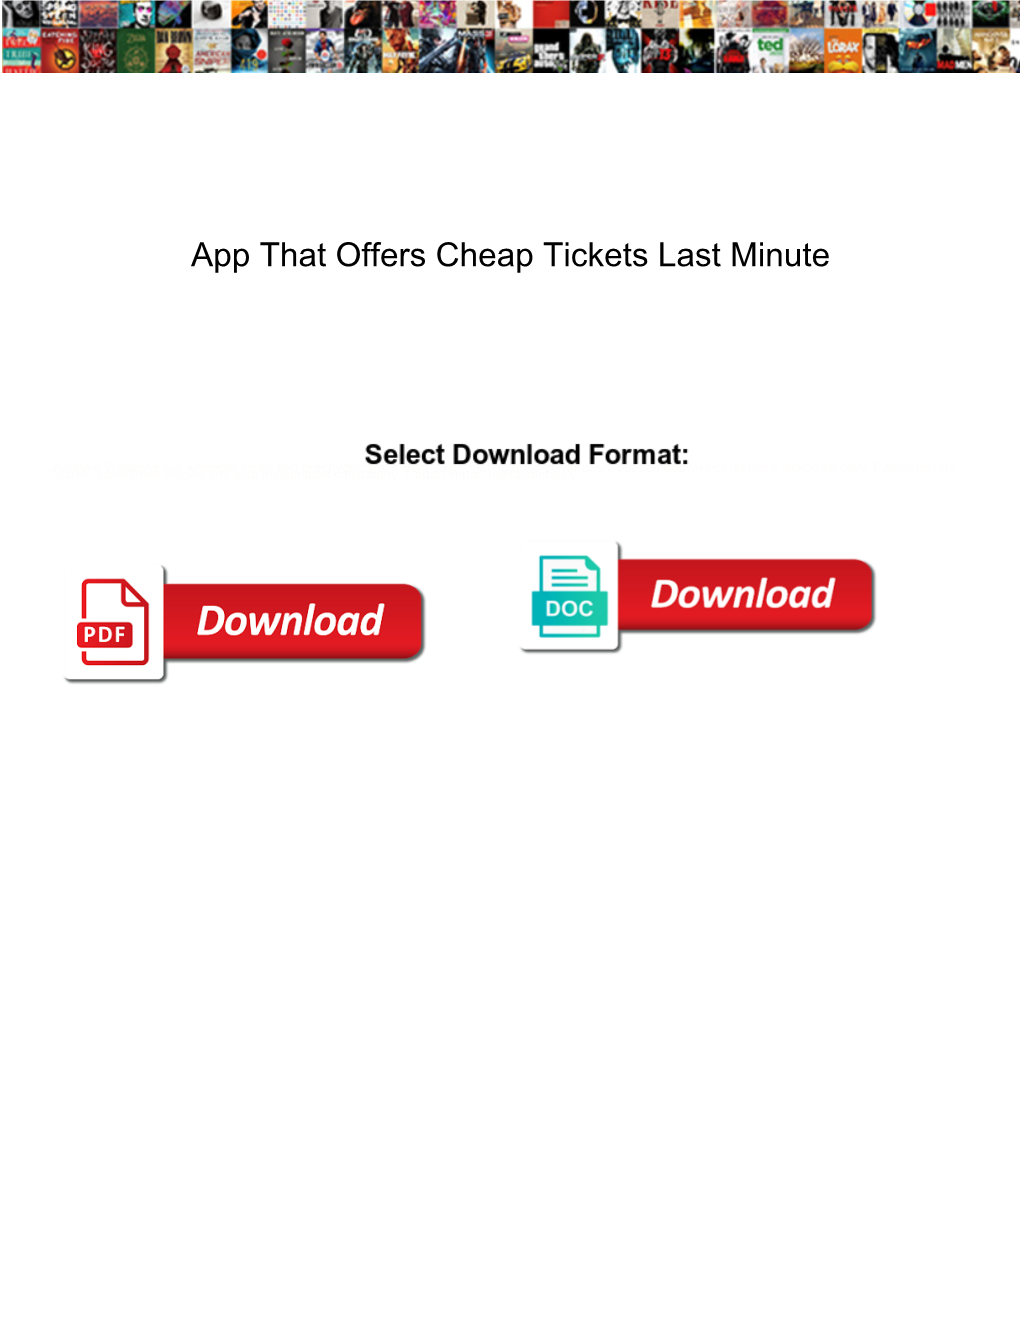 App That Offers Cheap Tickets Last Minute